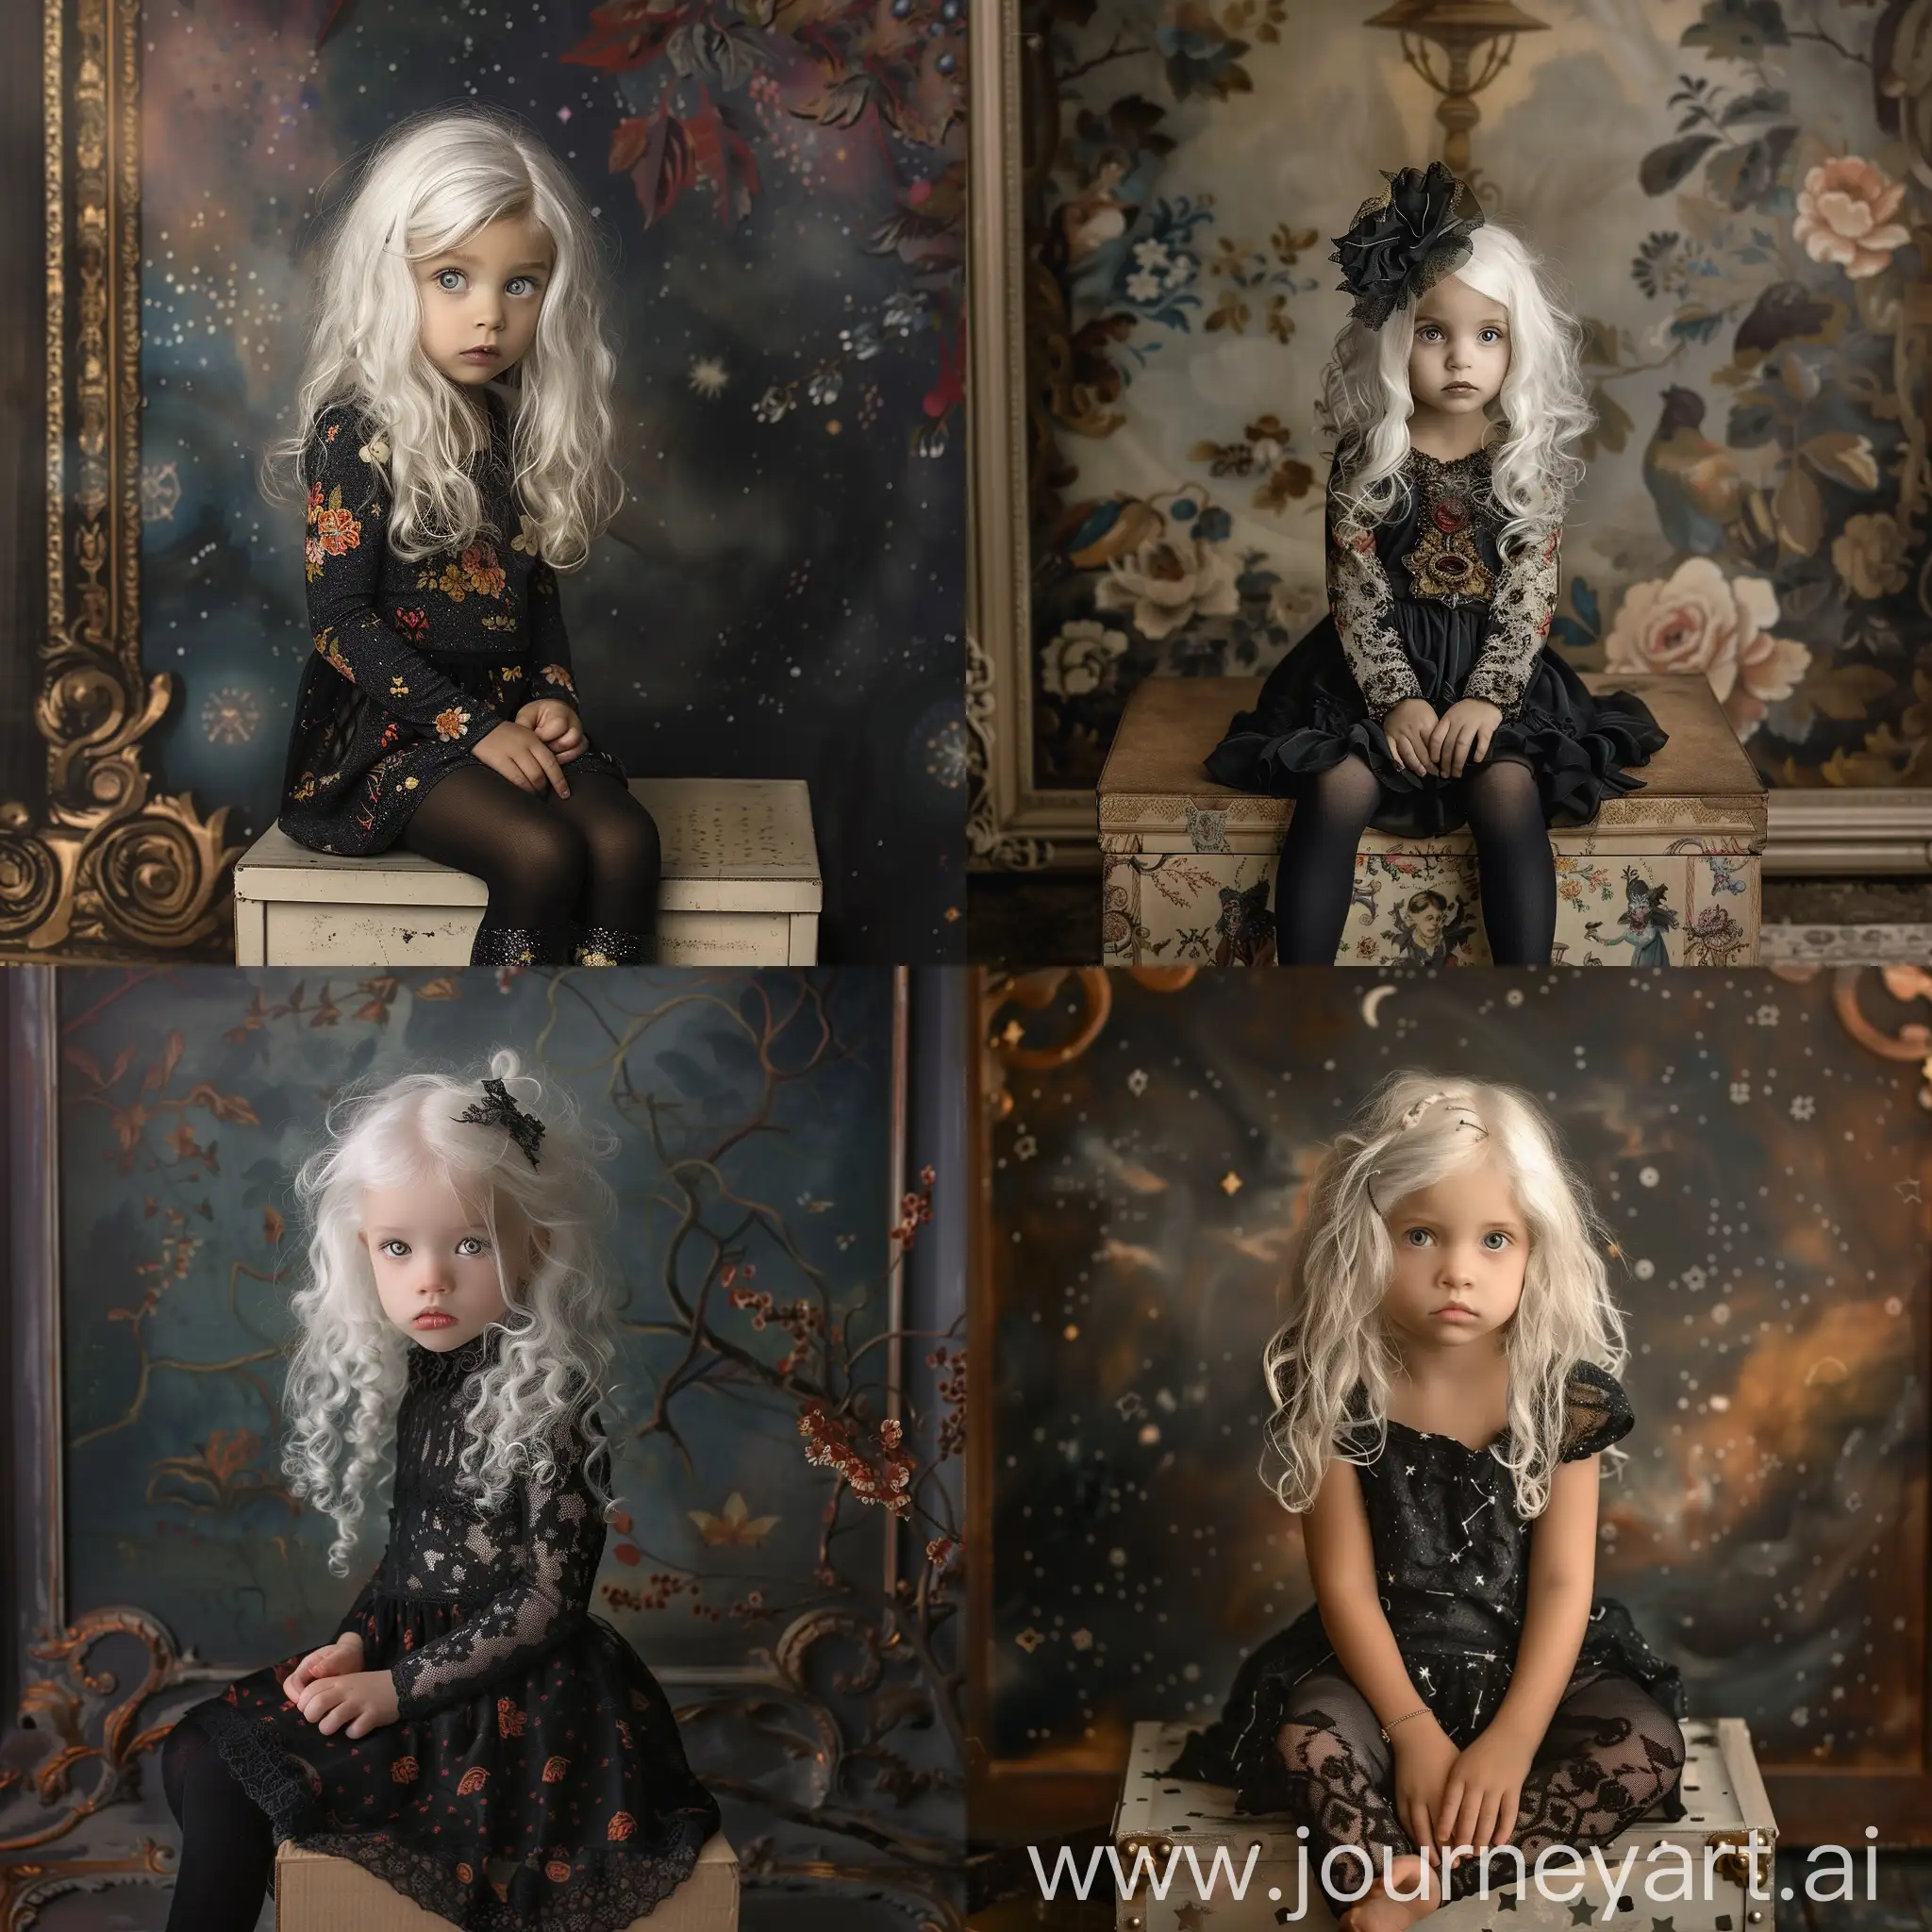 Enigmatic-WhiteHaired-Girl-in-Bohemian-Gothic-Fashion-Surreal-Natalie-Shau-Inspired-Art